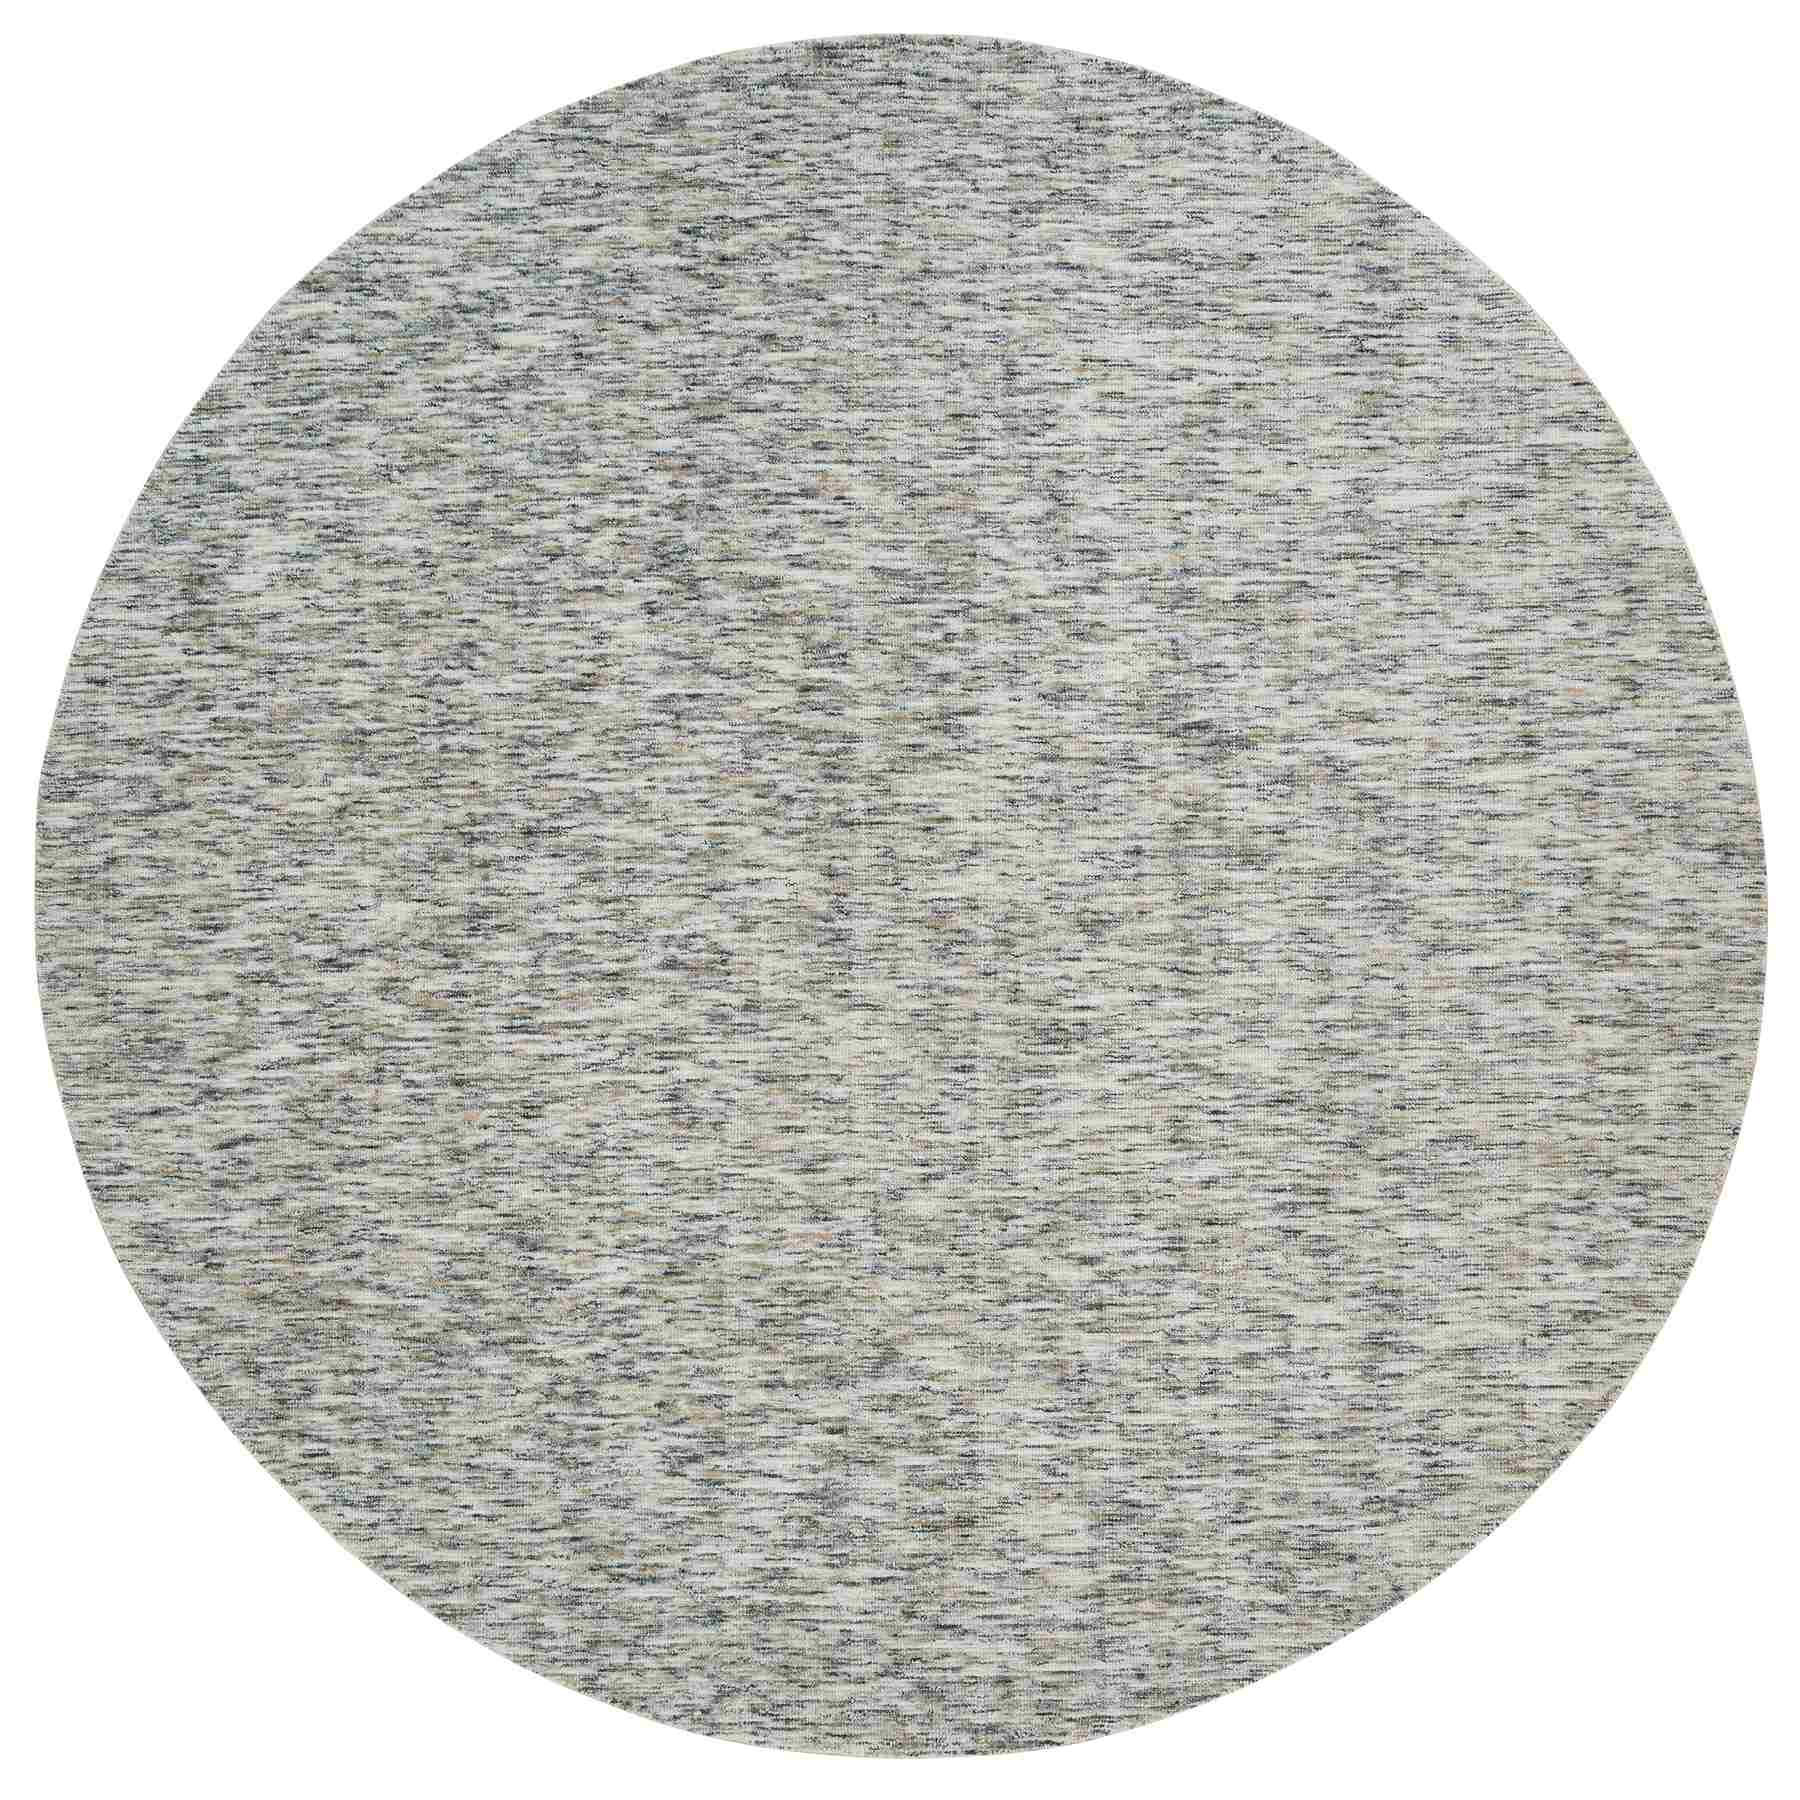 Earth Tone Colors, Modern Striped Design, Soft pile, Pure Wool, Hand Loomed, Round Oriental Rug